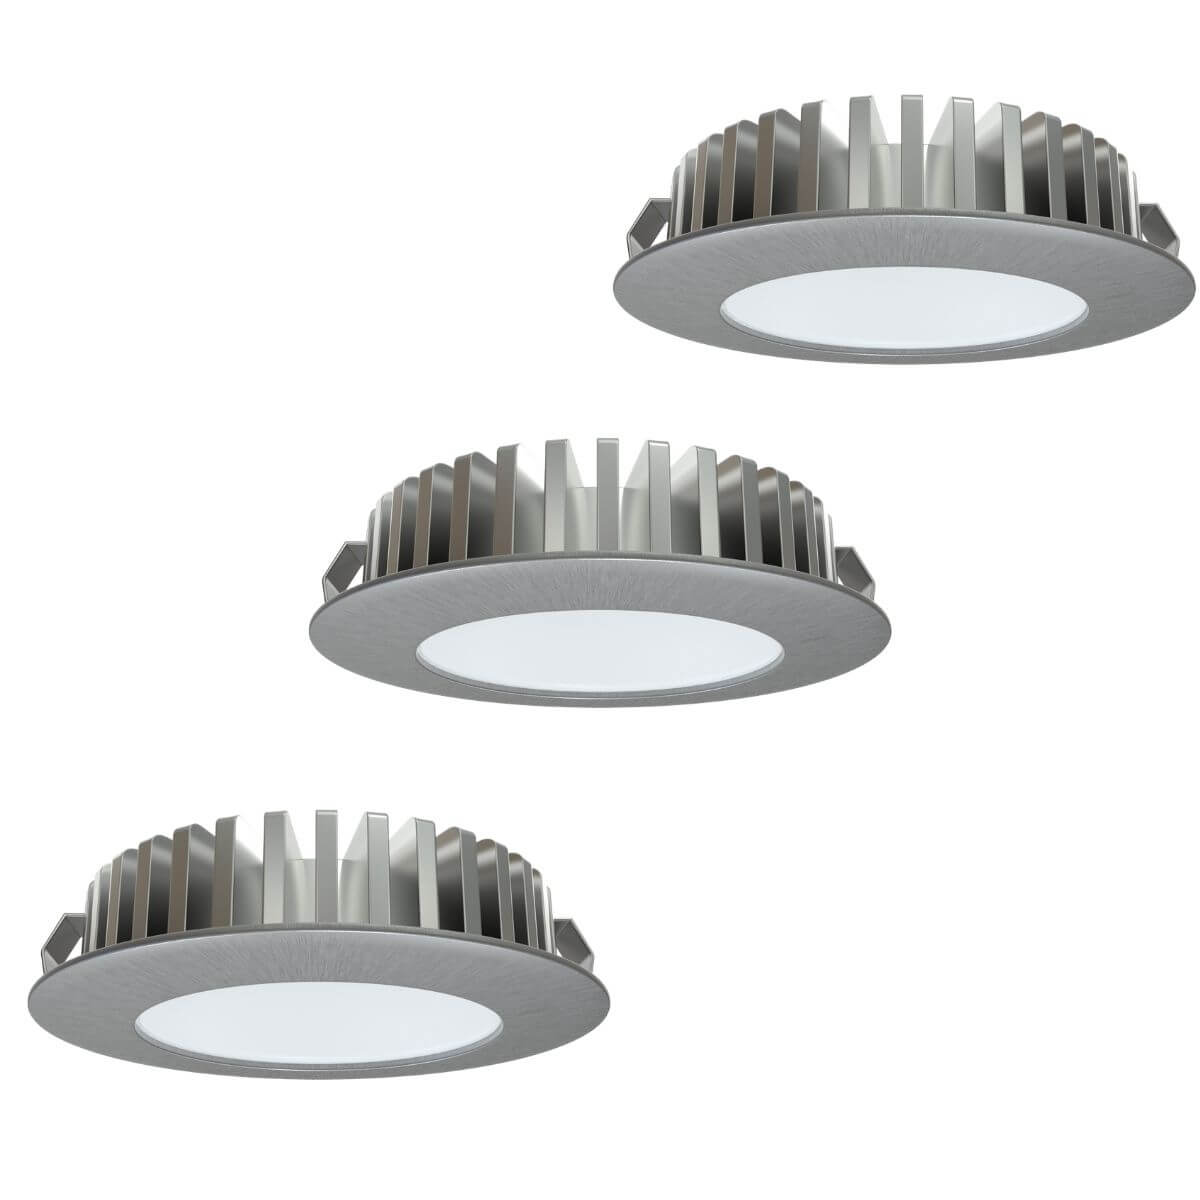 View Pack of 3 High Brightness Recessed LED Under Cabinet Light With a 8w Driver information